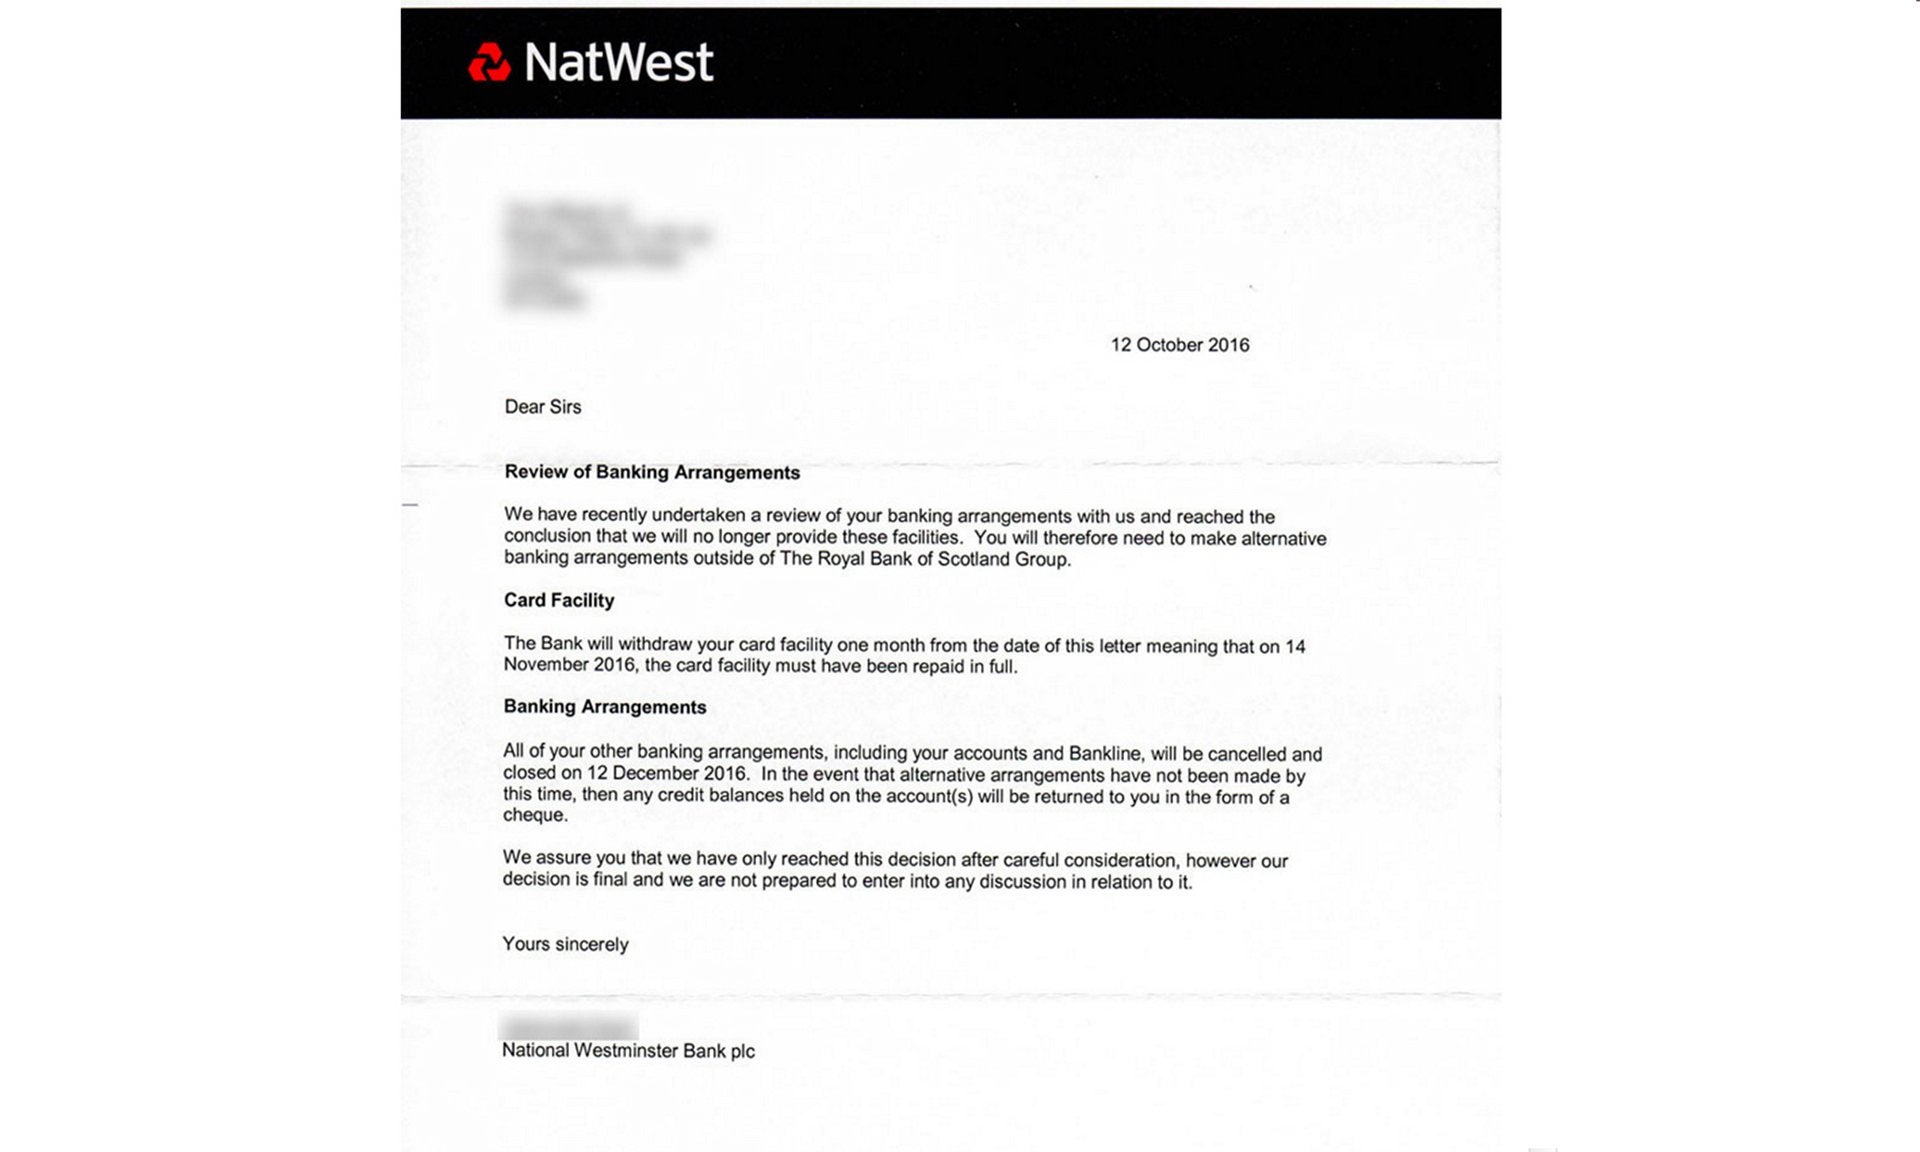 NatWest informed RT UK that it would be withdrawing its banking facilities